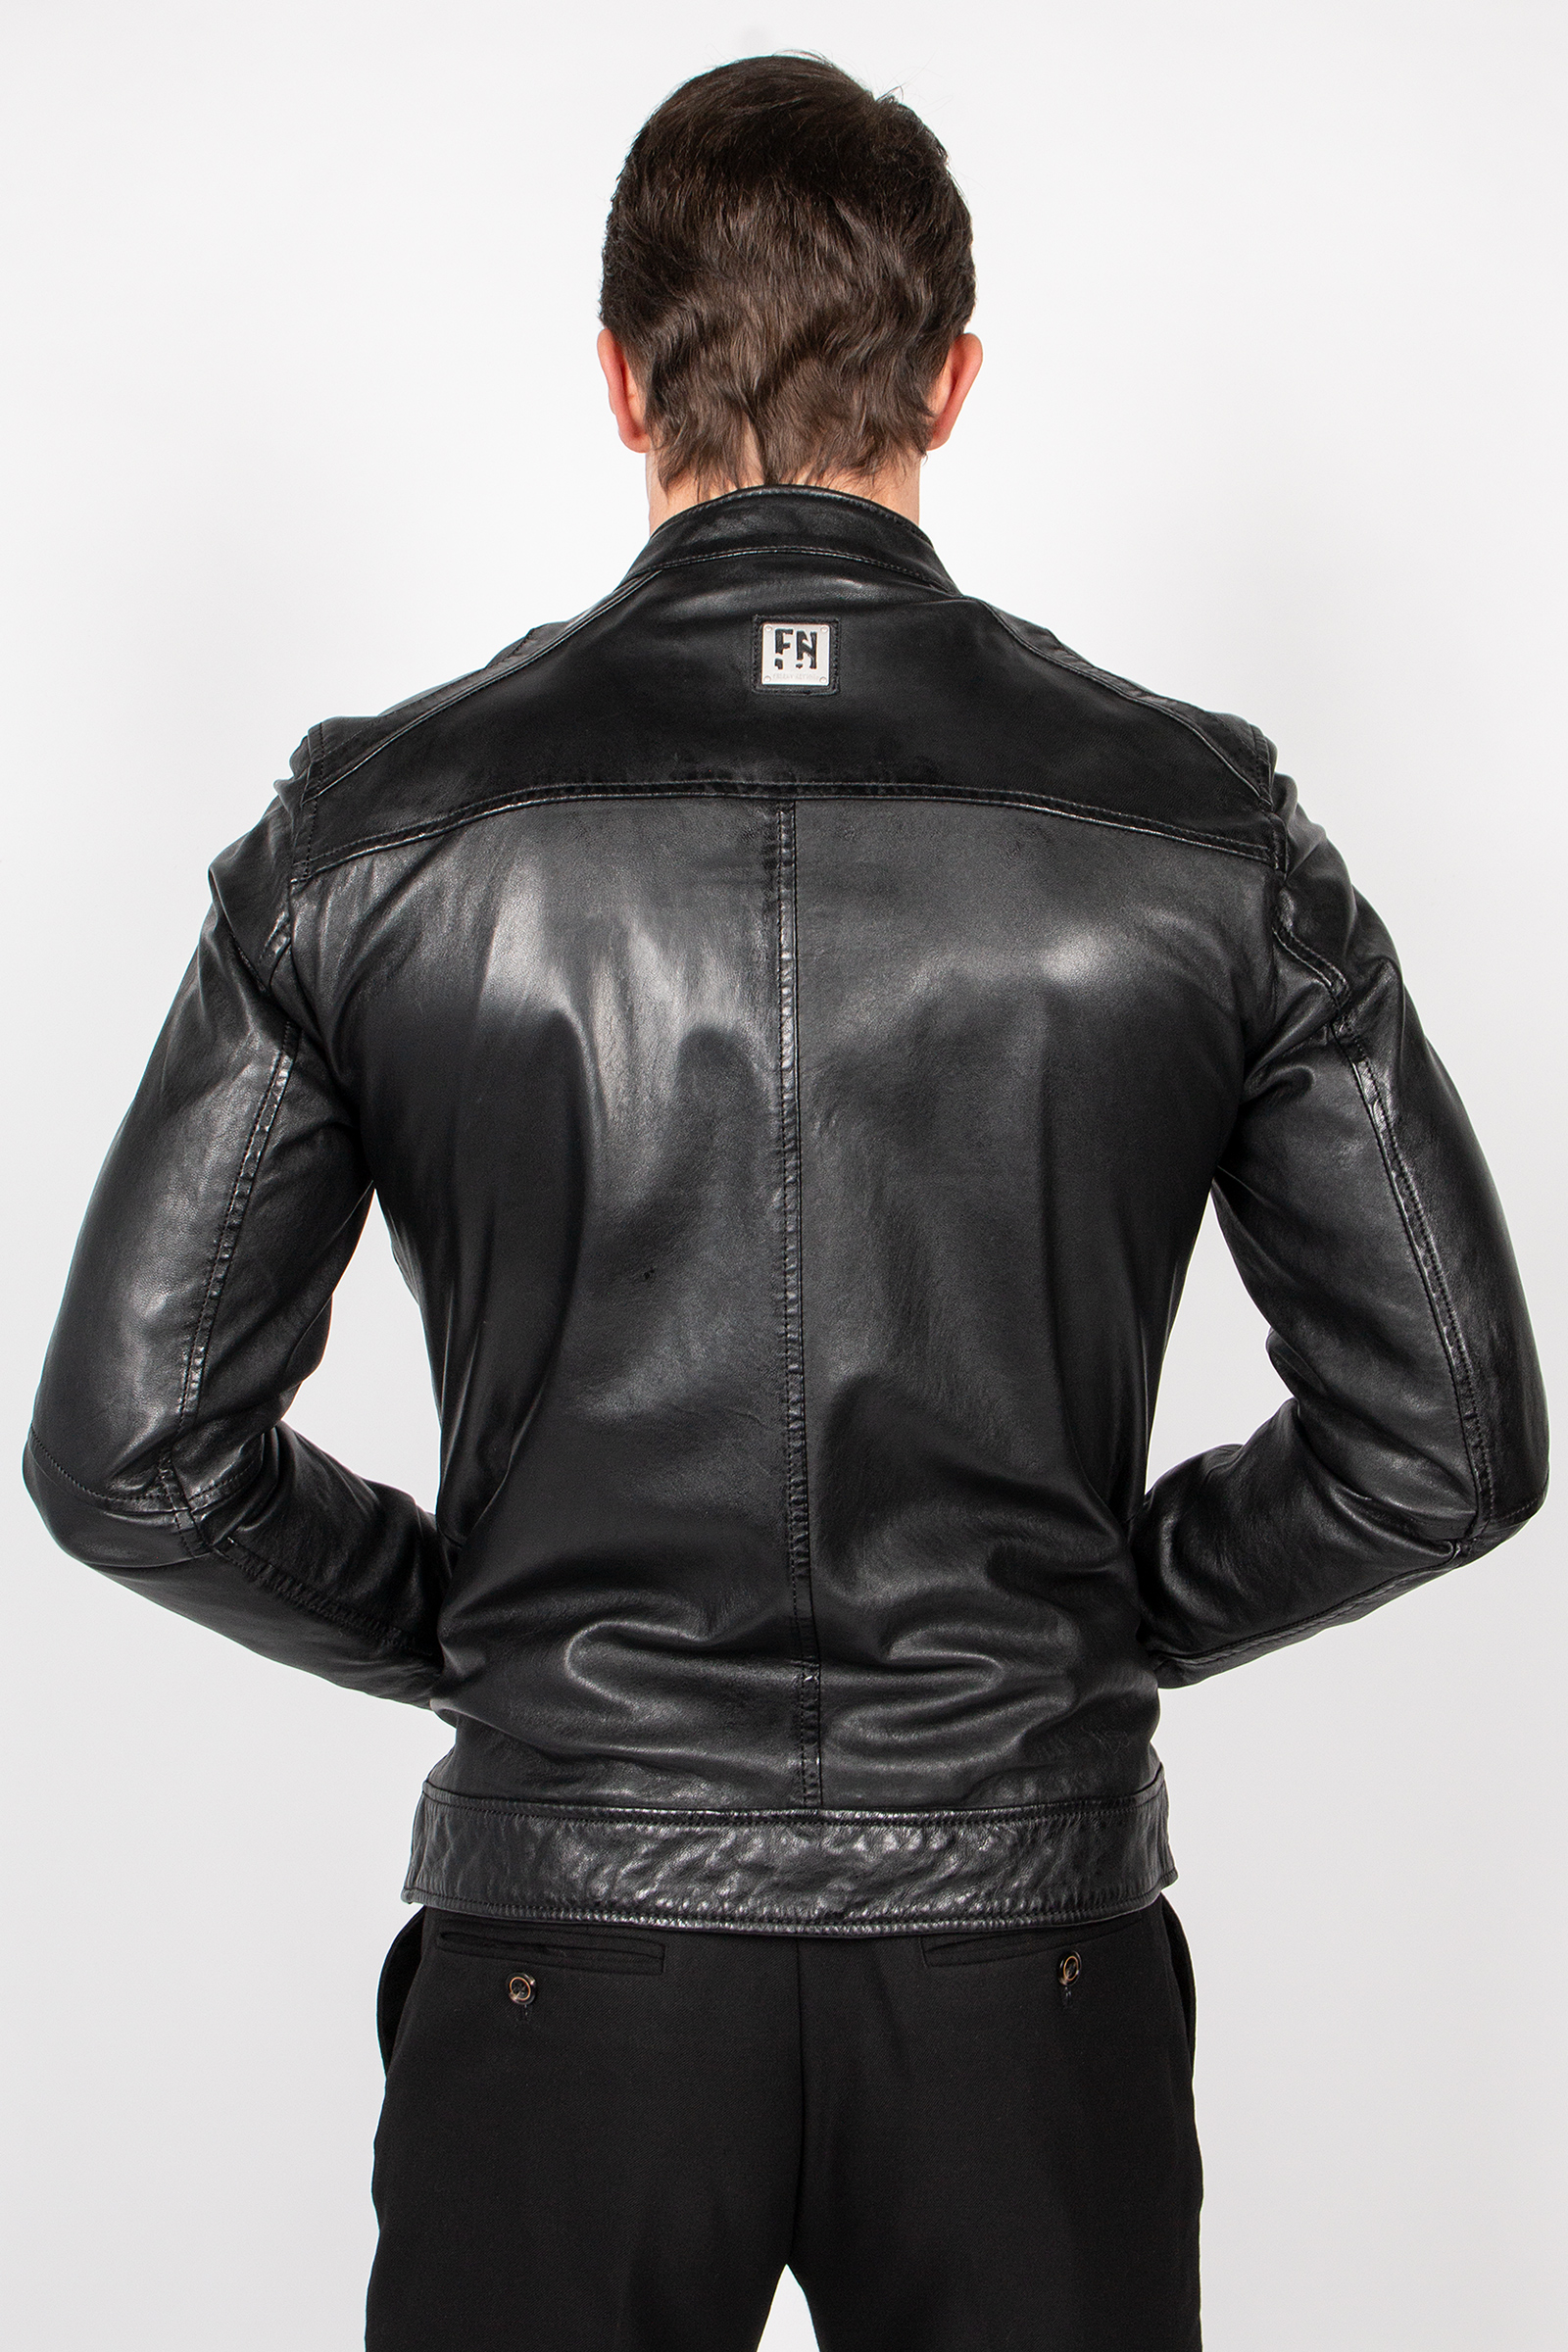 Lucky Jim-FN | Leather Jackets | Men | Freaky Nation